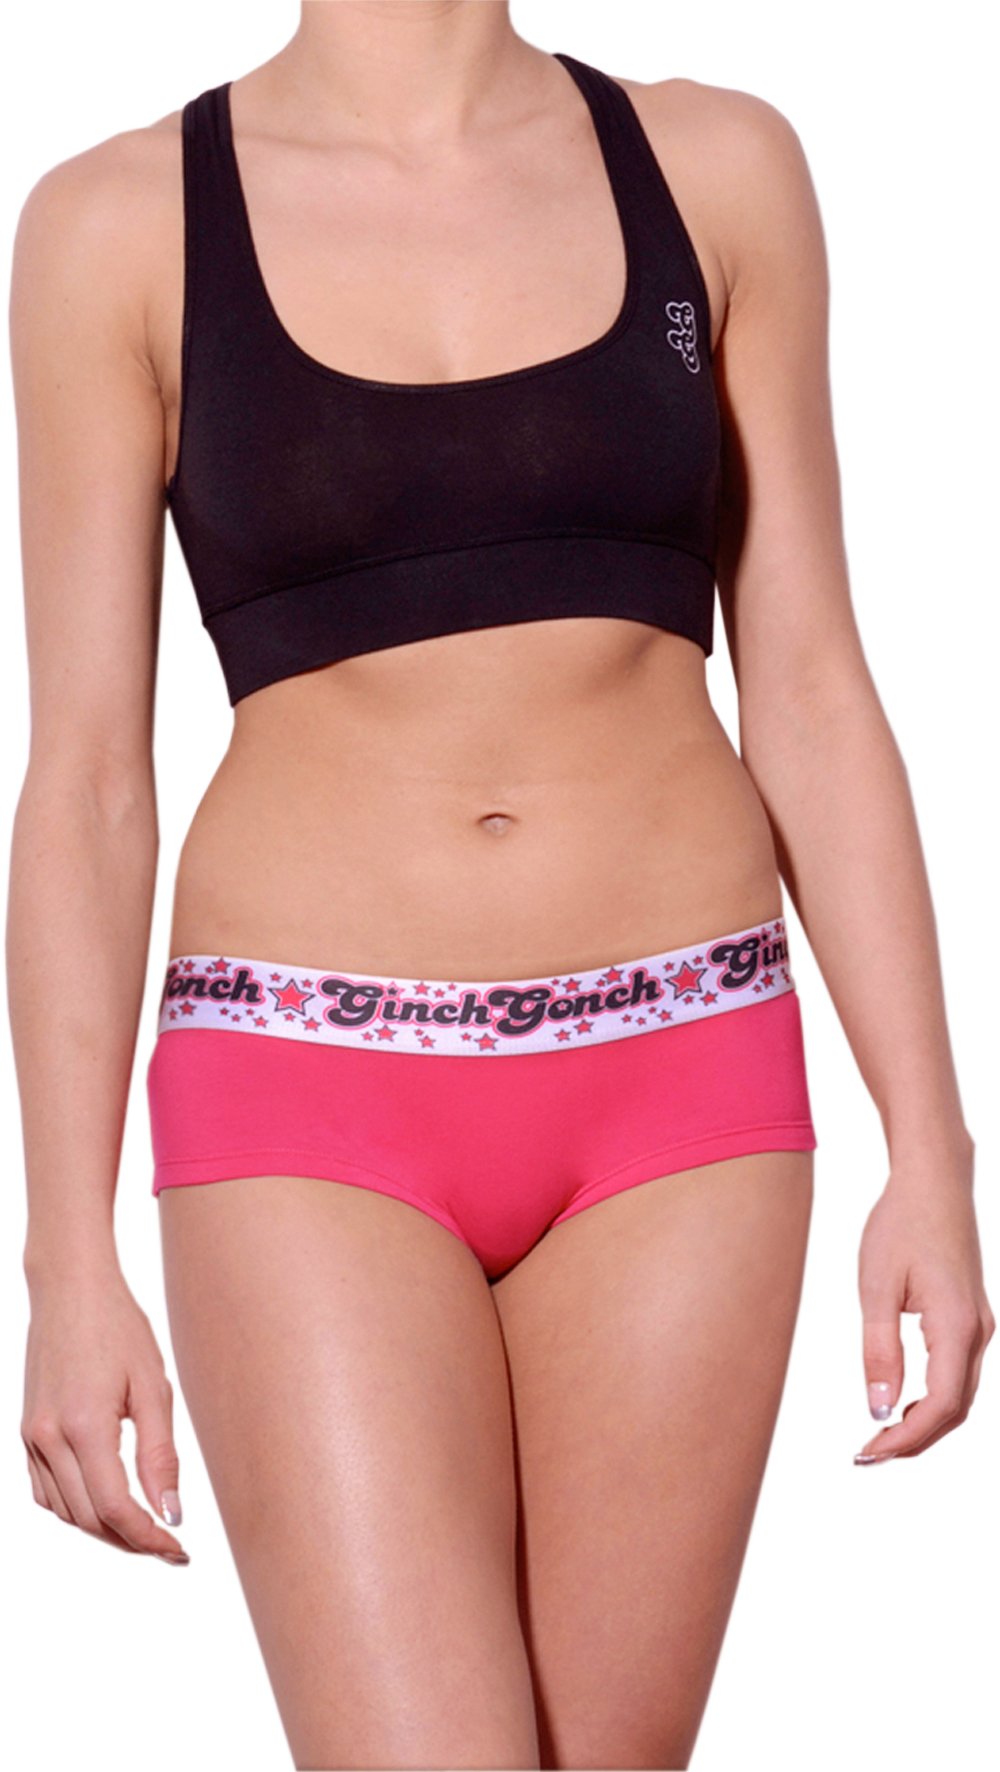 GG Ginch Gonch Mean Pink women's boy cut brief underwear cheeky gogo with pink fabric with black, white, and pink printed waistband front shown with black sports bra